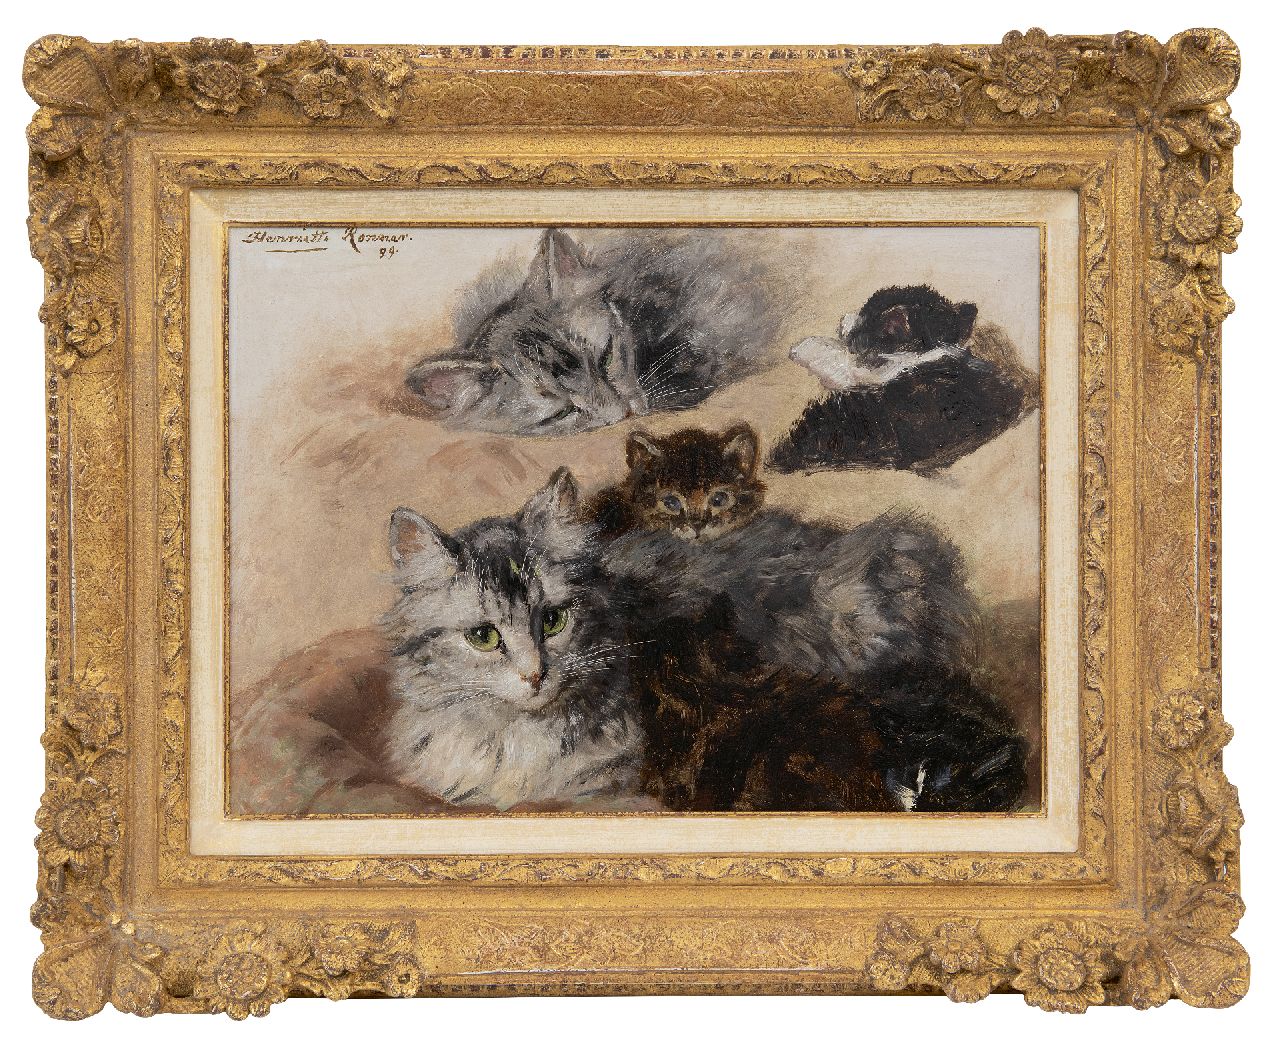 Ronner-Knip H.  | Henriette Ronner-Knip | Paintings offered for sale | Study of a cat and kittens, oil on panel 27.7 x 37.4 cm, signed u.l. and dated '99